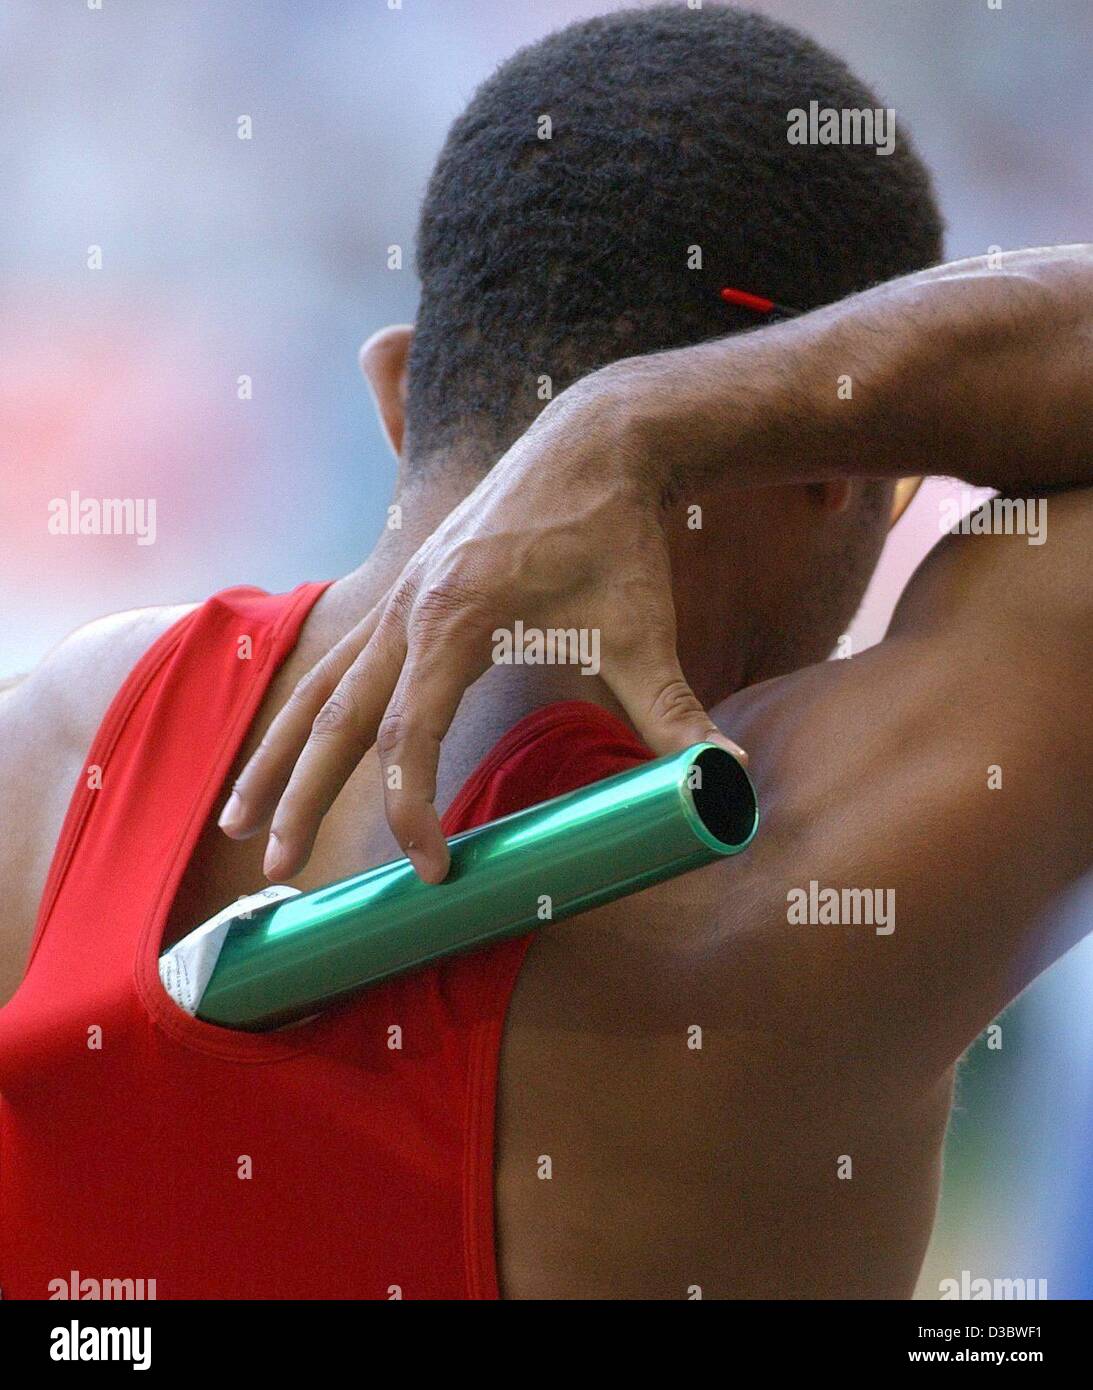 (dpa) - A runner from the Dominican Republic has stowed away the baton in his shirt ahead of the preliminaries of the men's 4x400 m relay at the 9th IAAF Athletic World Championships at the Stade de France in Paris, 30 August 2003. Stock Photo